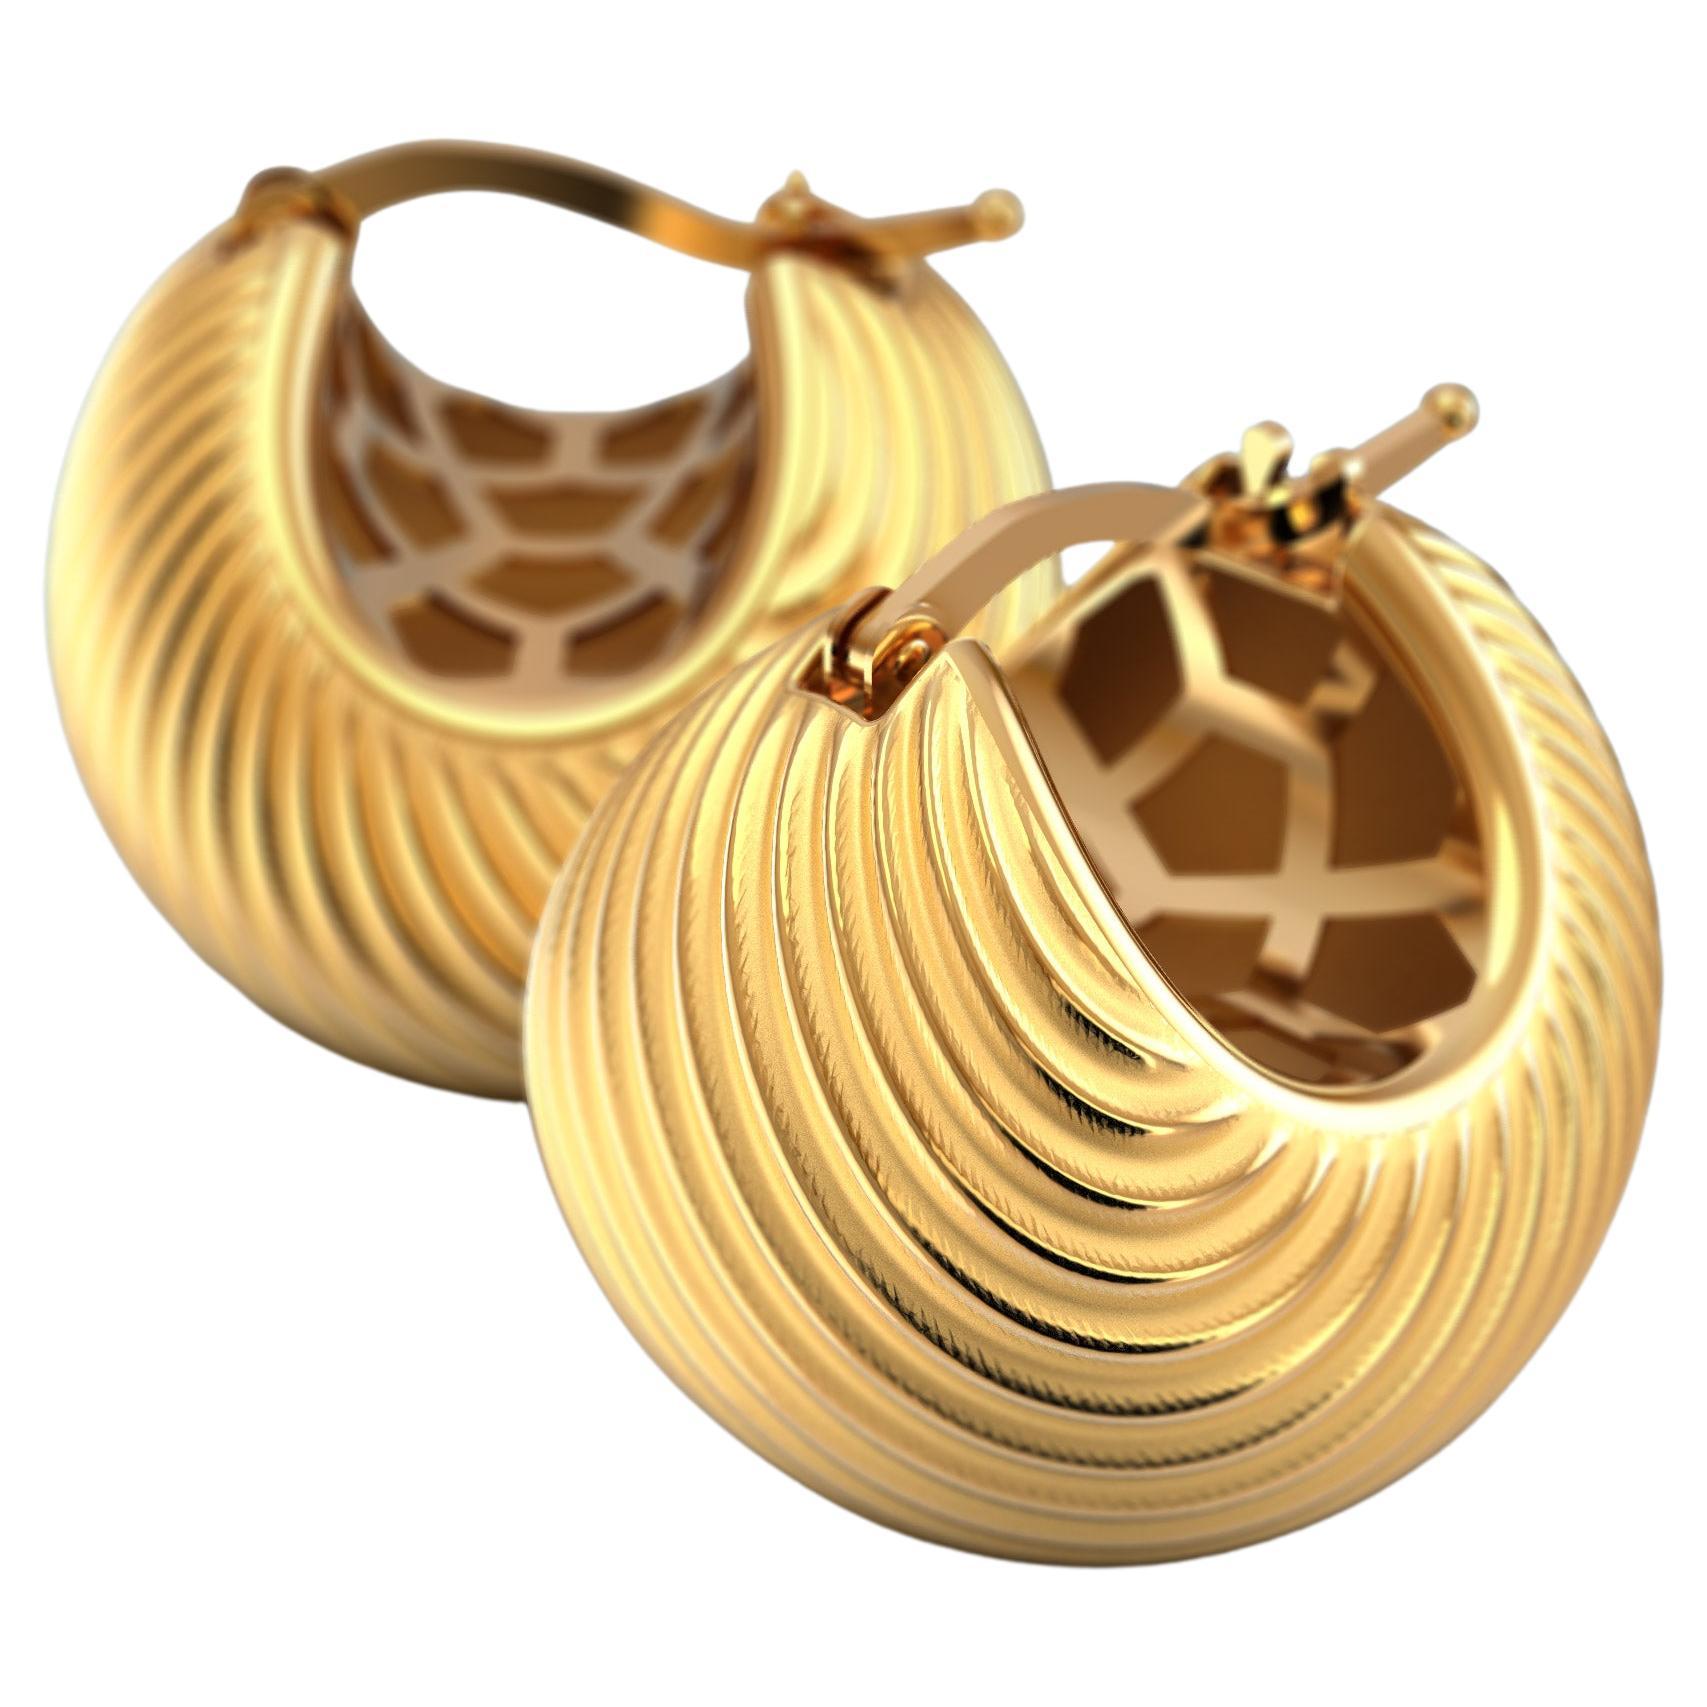 Oltremare Gioielli 18 Karat Yellow Gold Hoop Earrings Made in Italy For Sale